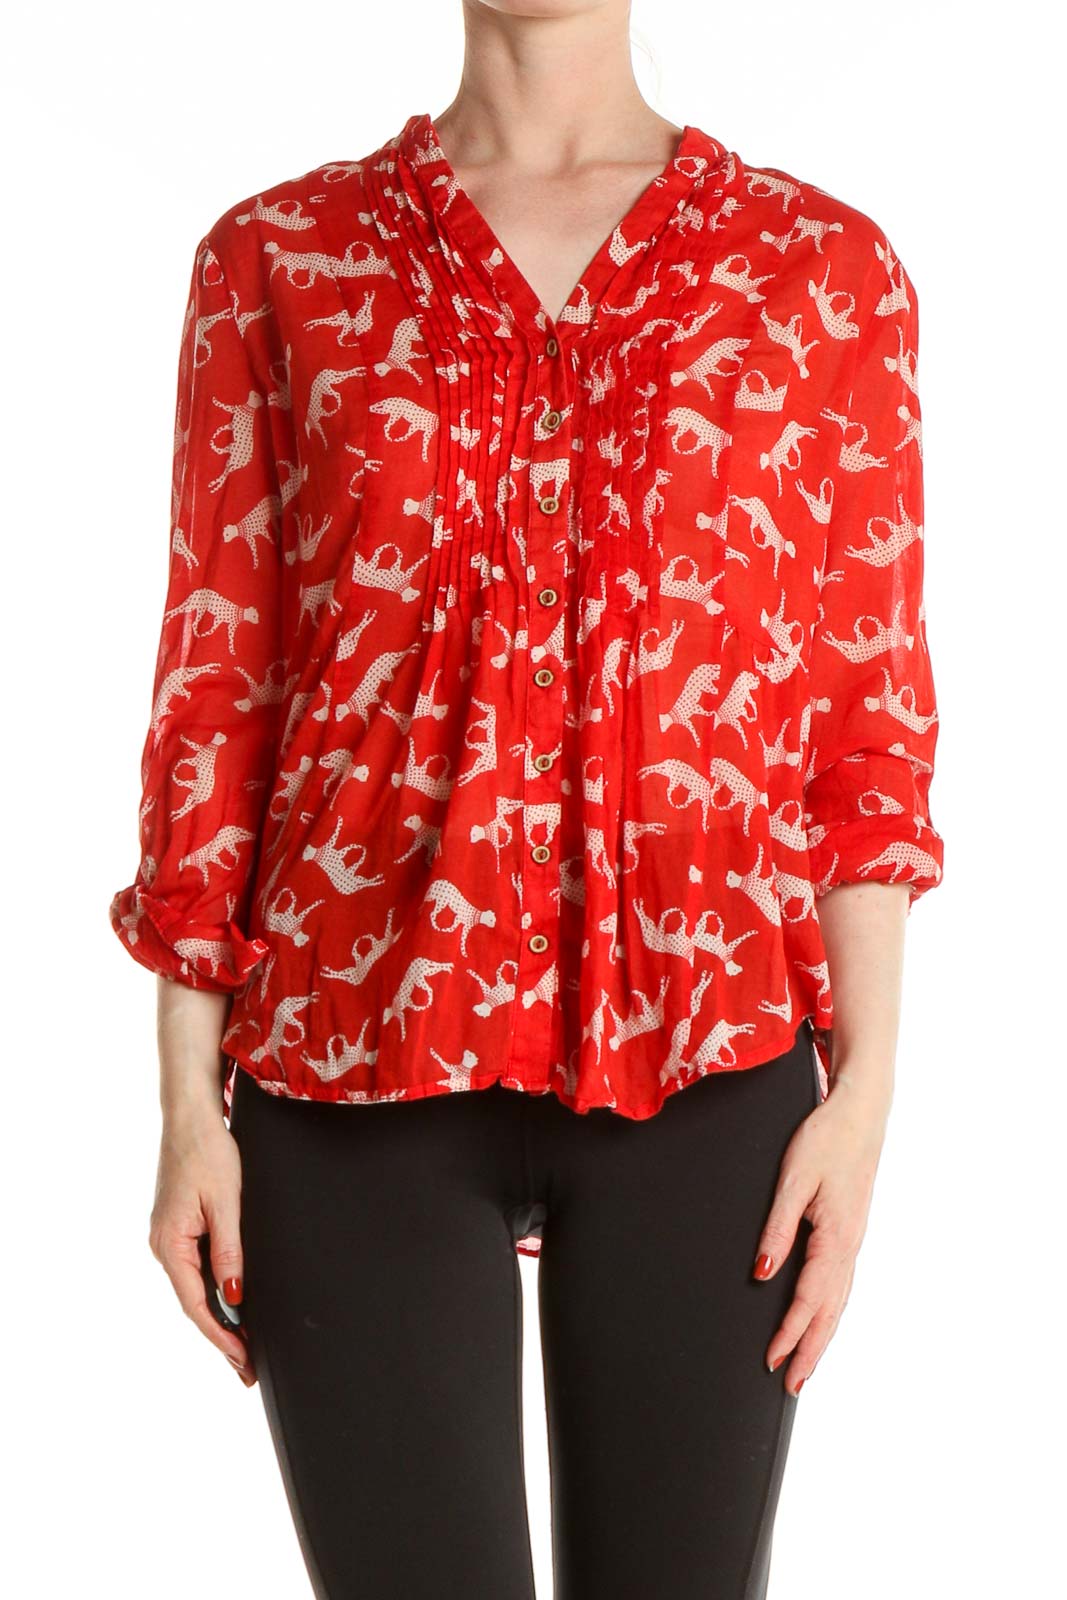 Red Printed Retro Blouse Front